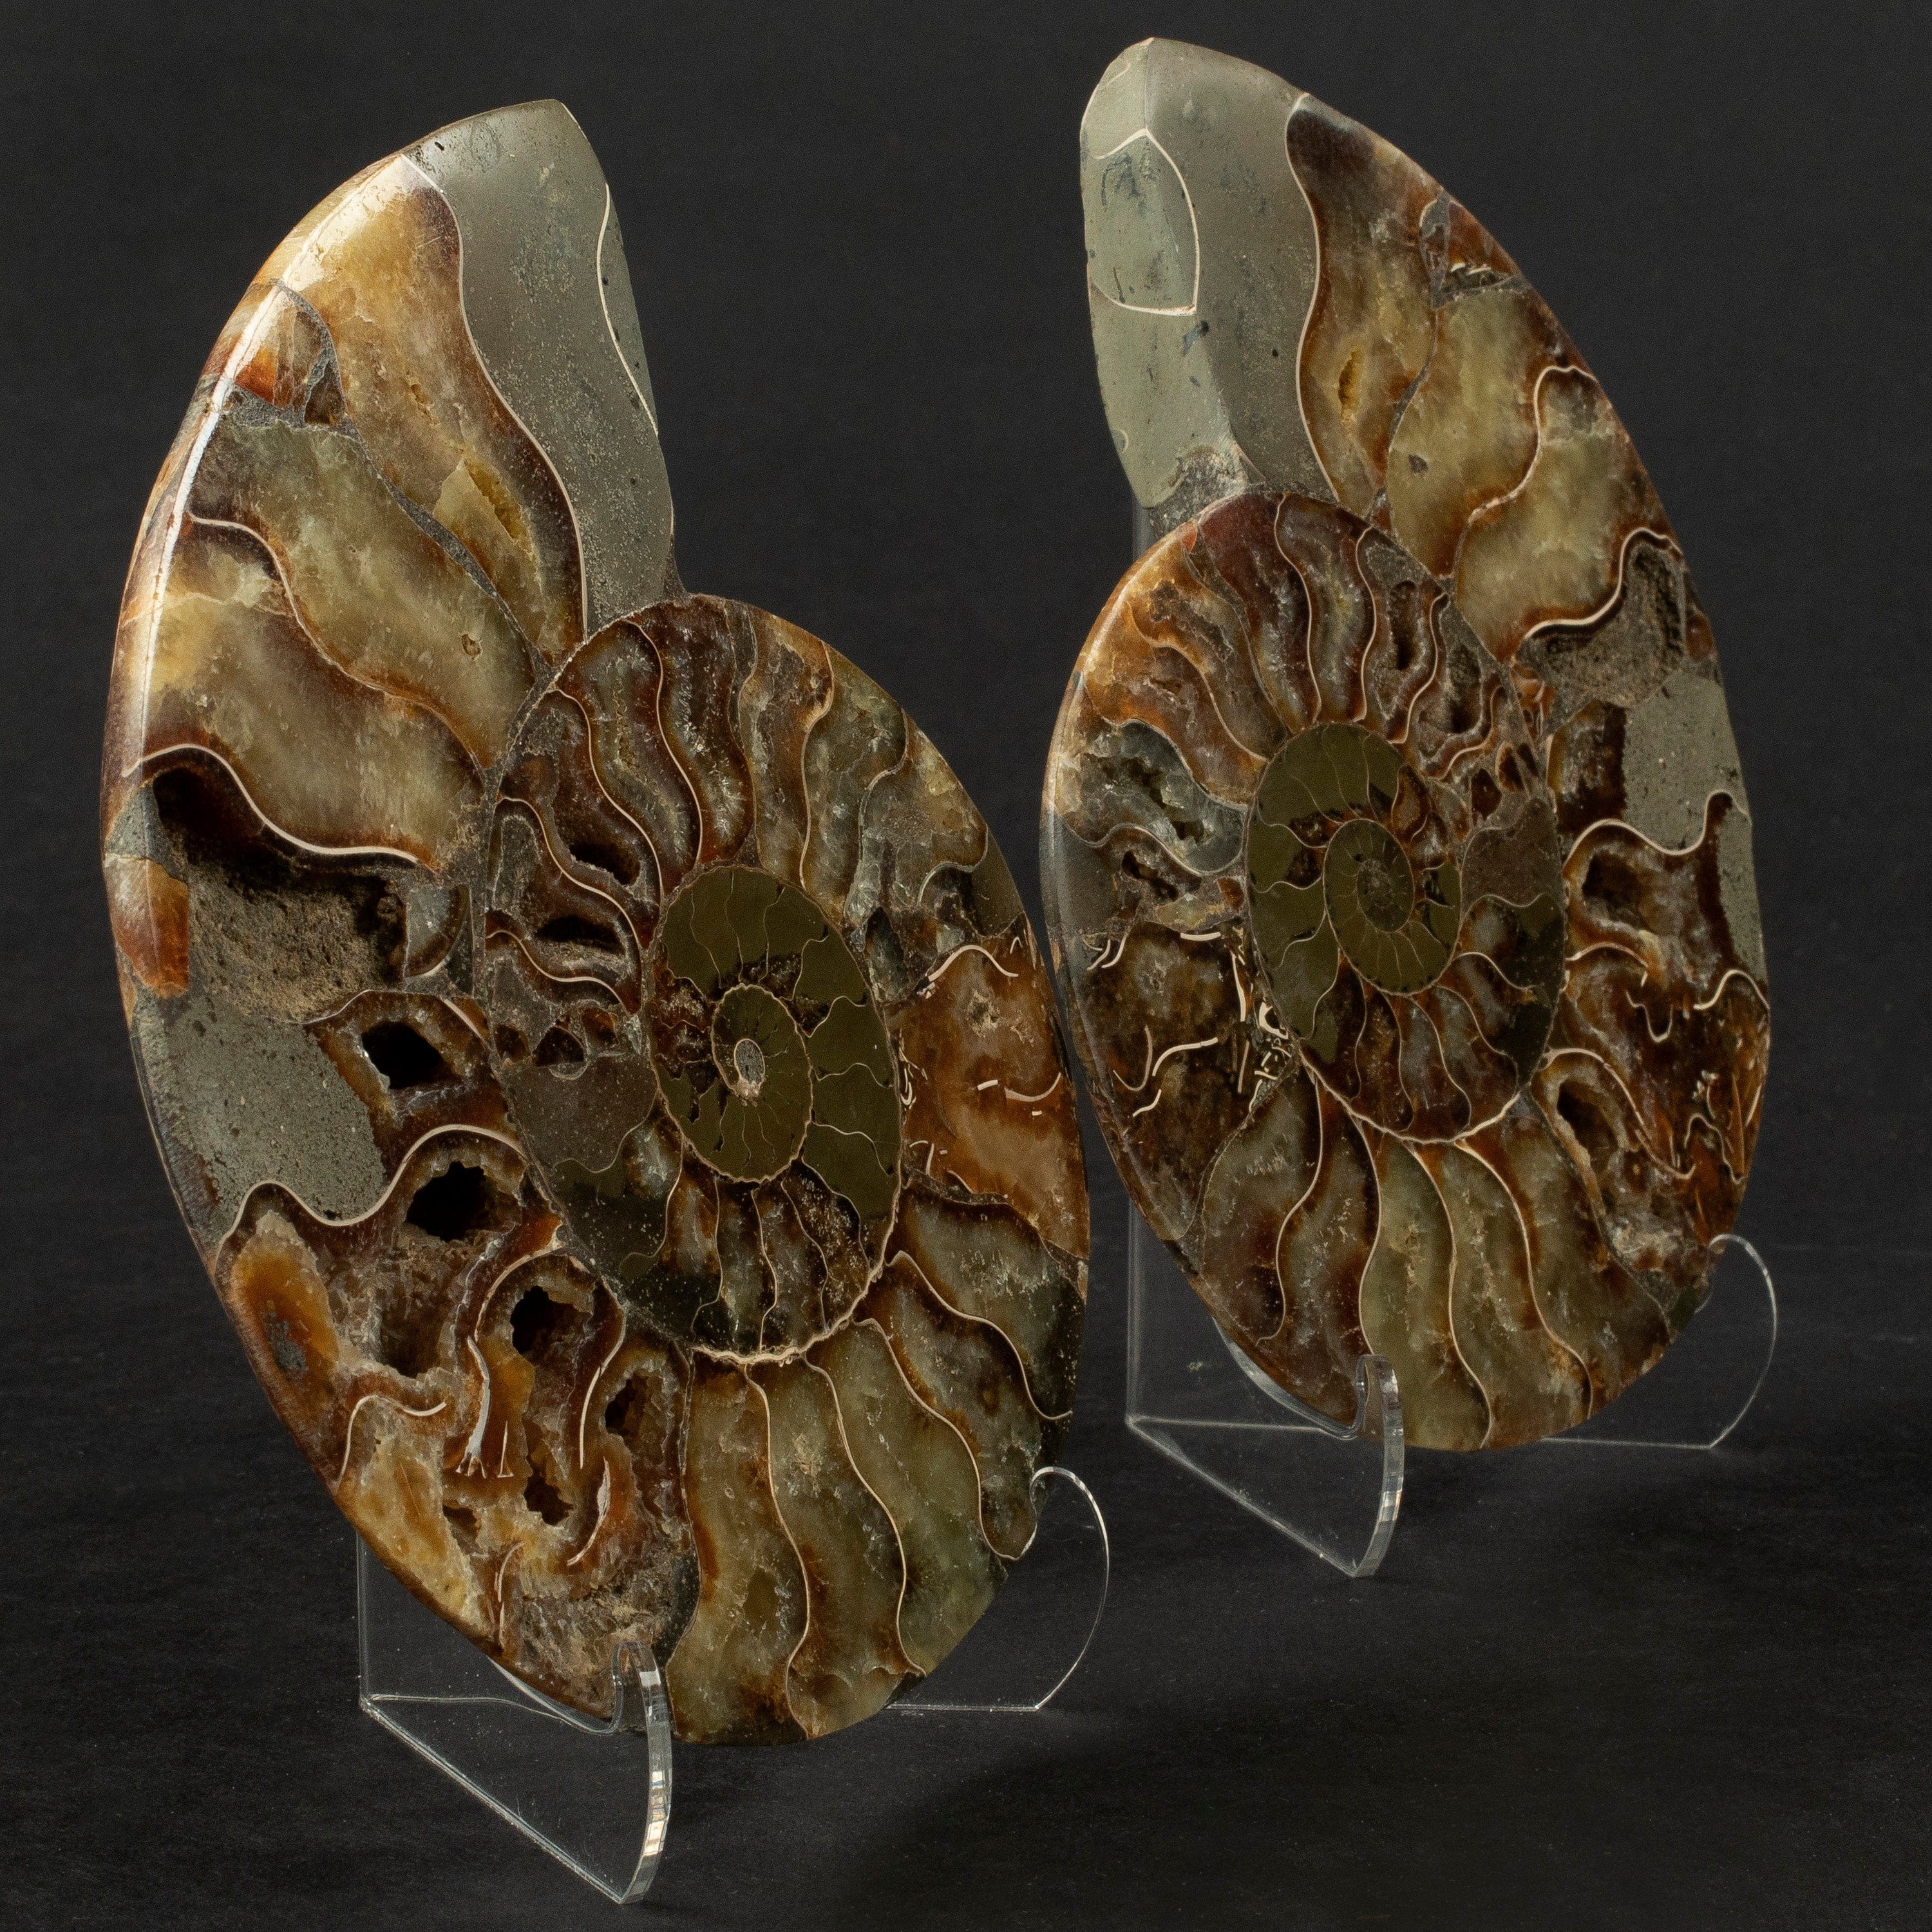 Kalifano Fossils & Minerals Natural Ammonite Pair from Madagascar - 6-8" AMM1200